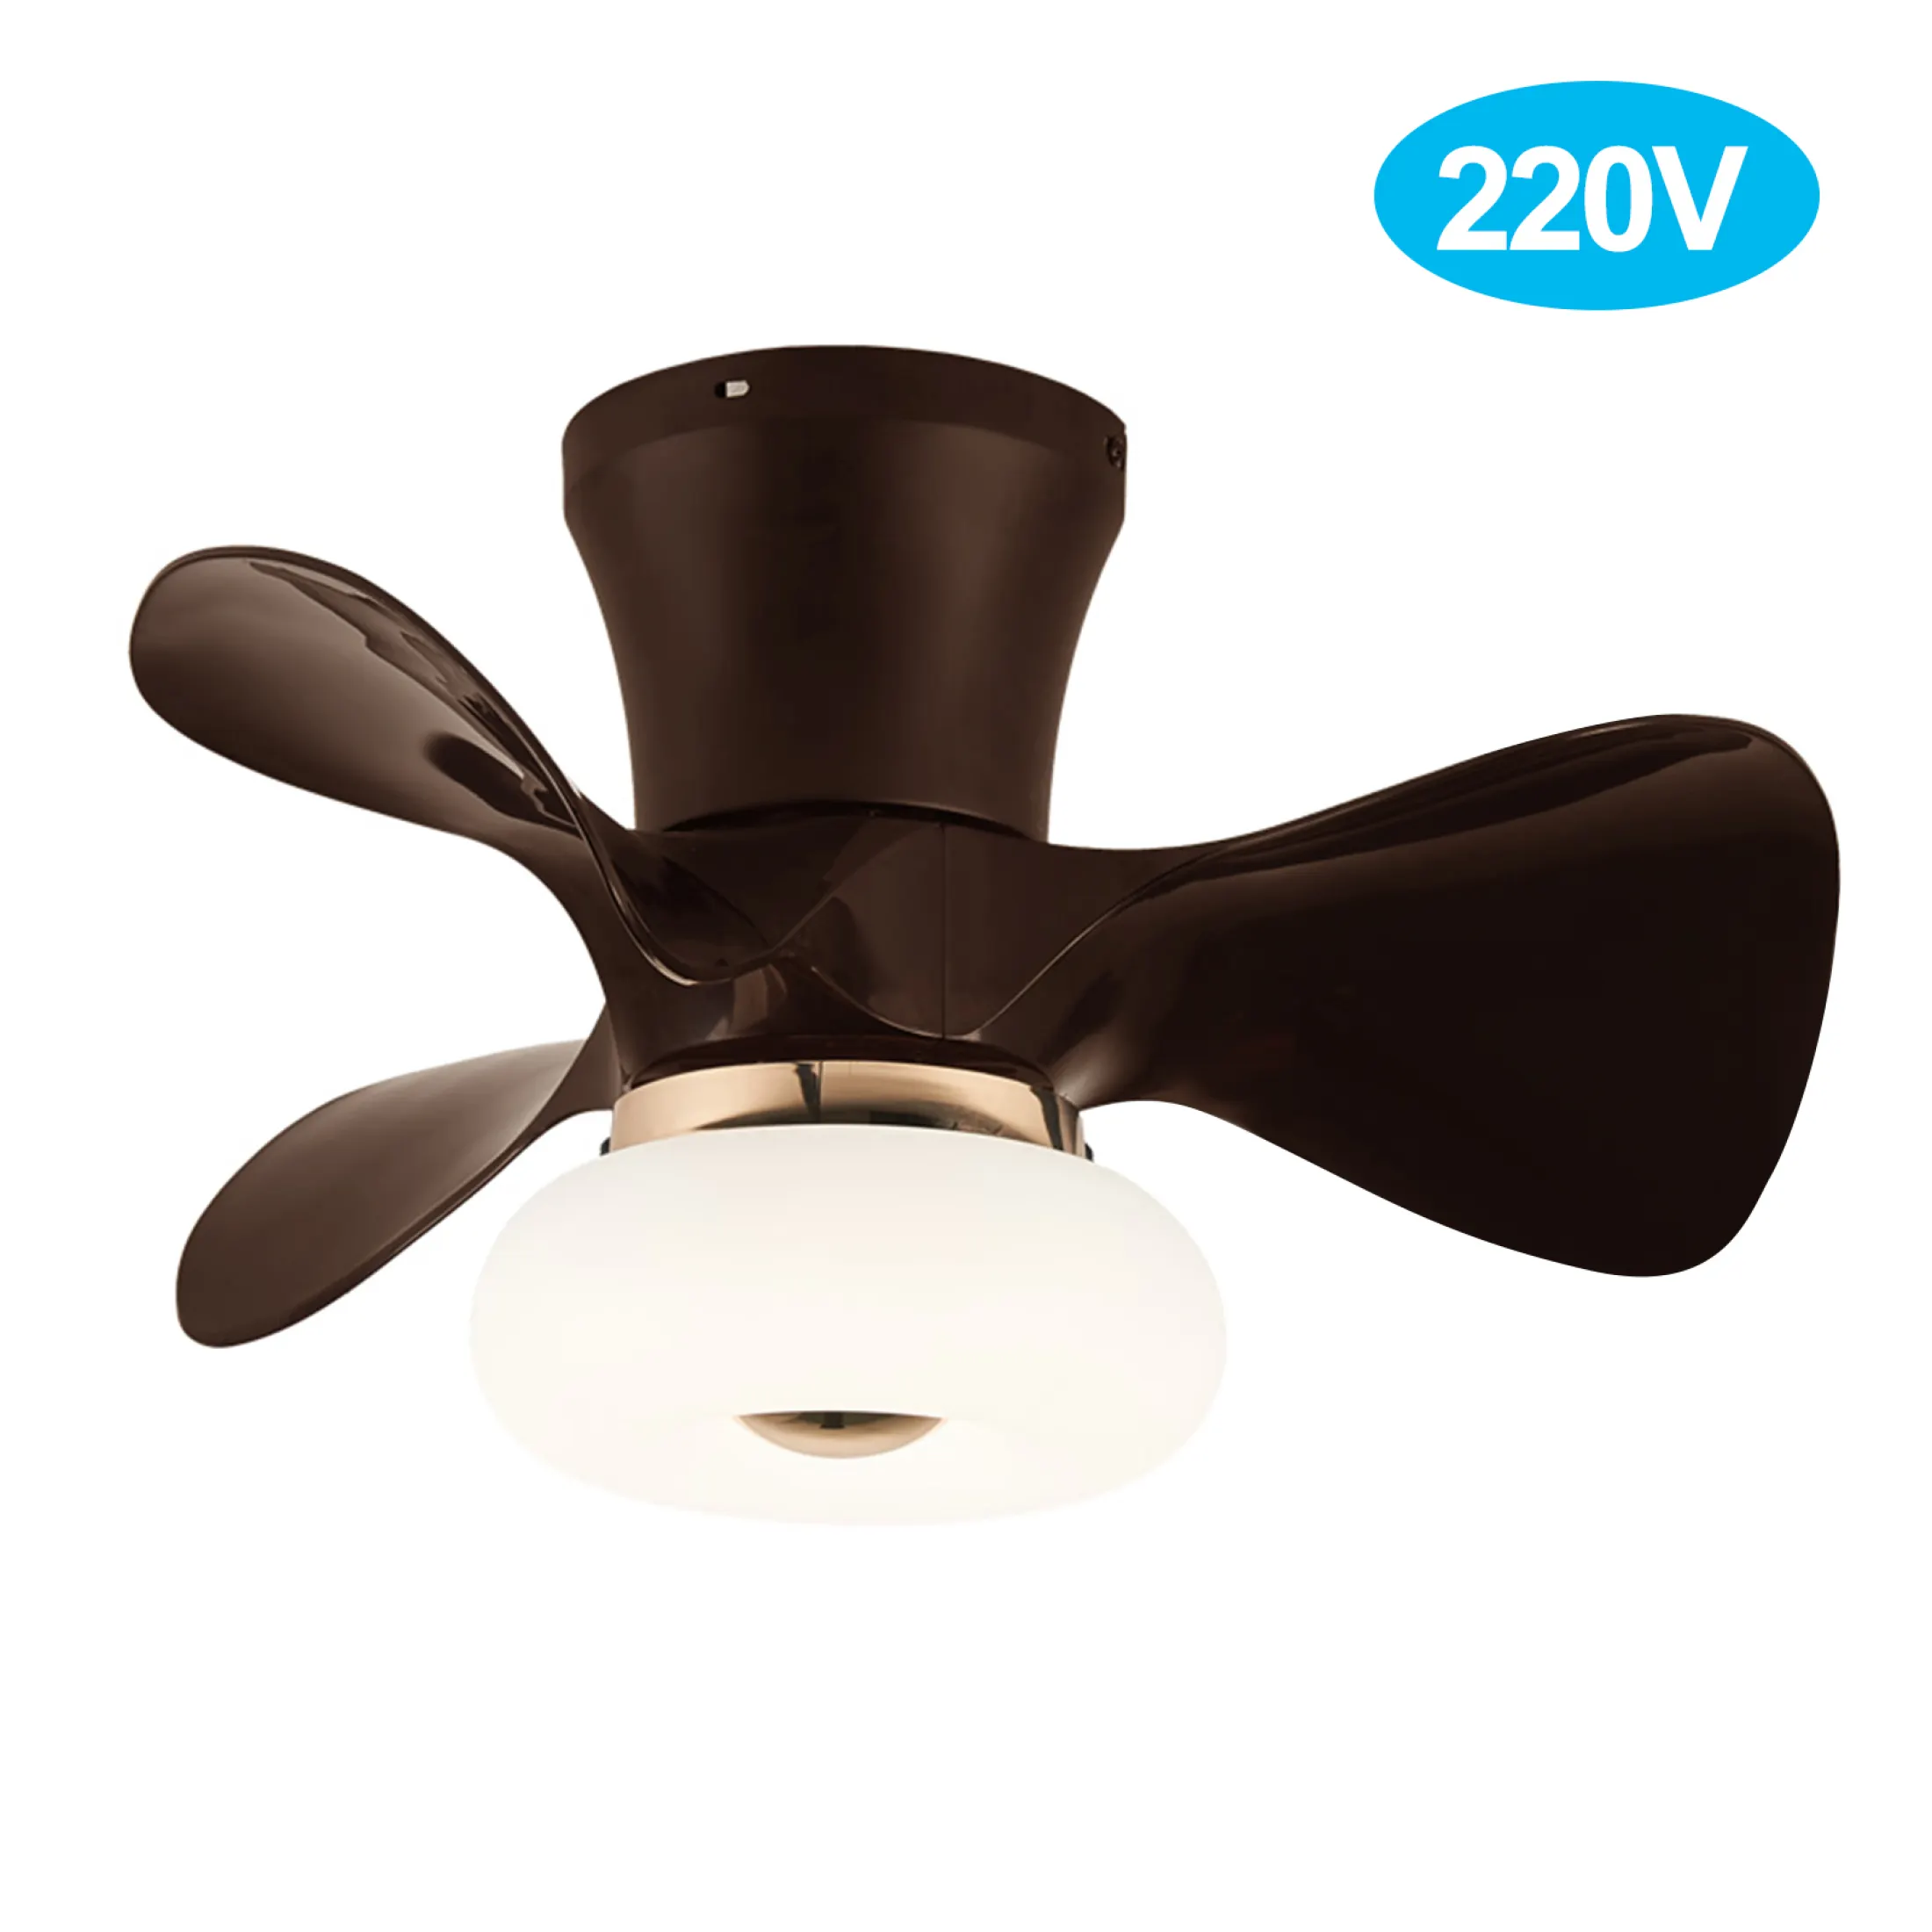 Fcmila Fs0021 Ac220v Ceiling Fan With, Can Ceiling Fan Lights Be Dimmed